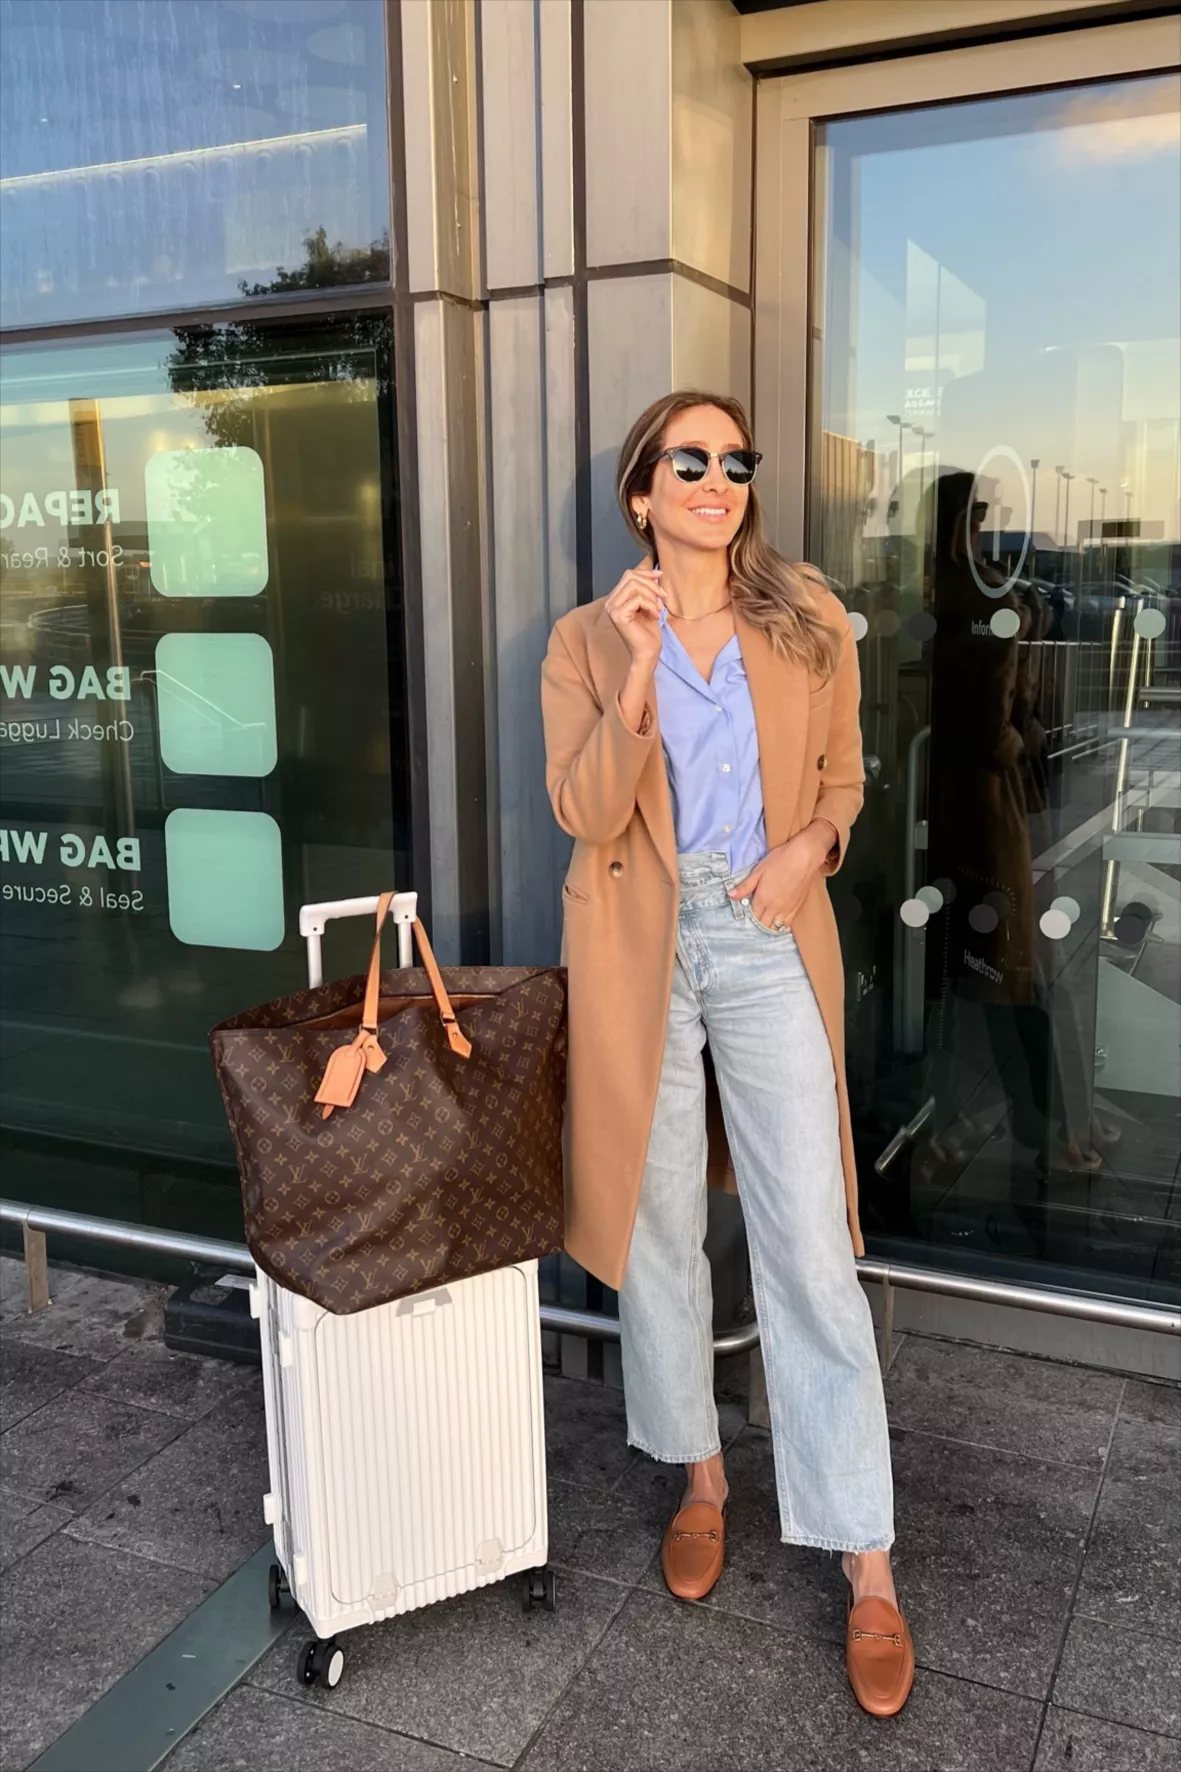 Travel Outfits: Traveling Outfit Ideas for Women, Comfy Travel Clothes